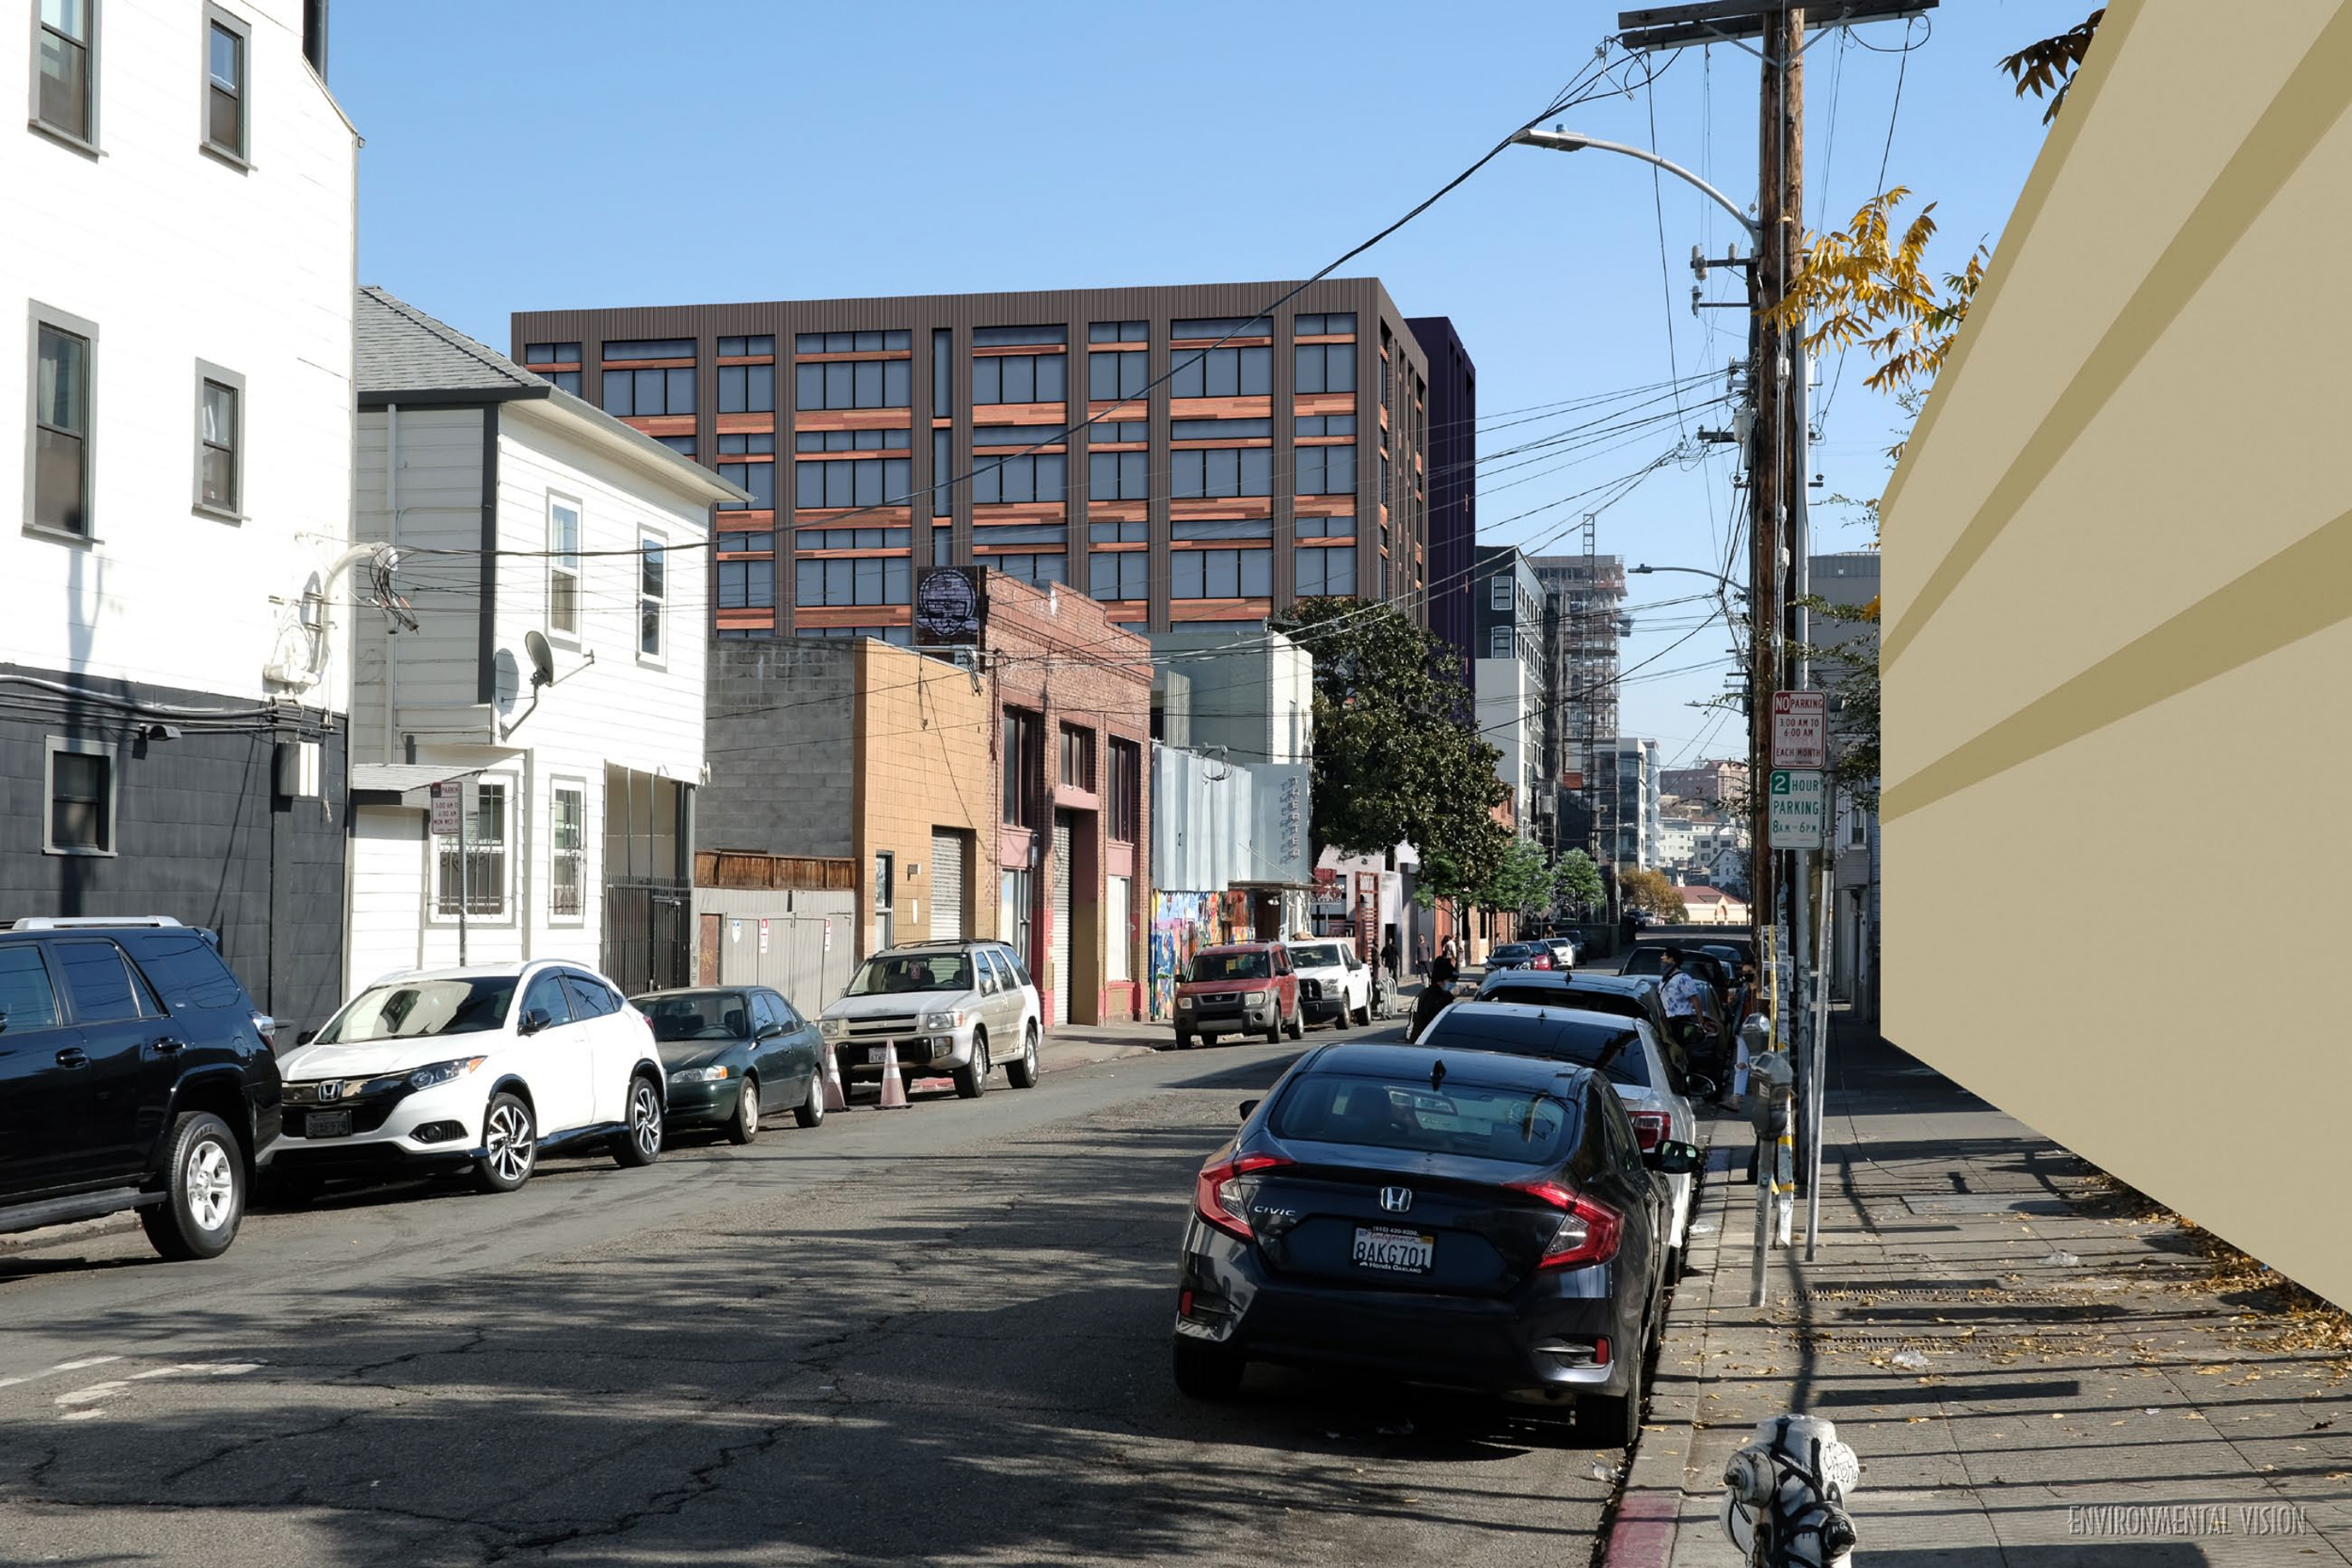 460 24th Street view from Telegraph Avenue and 24th Street, rendering by Environmental Vision